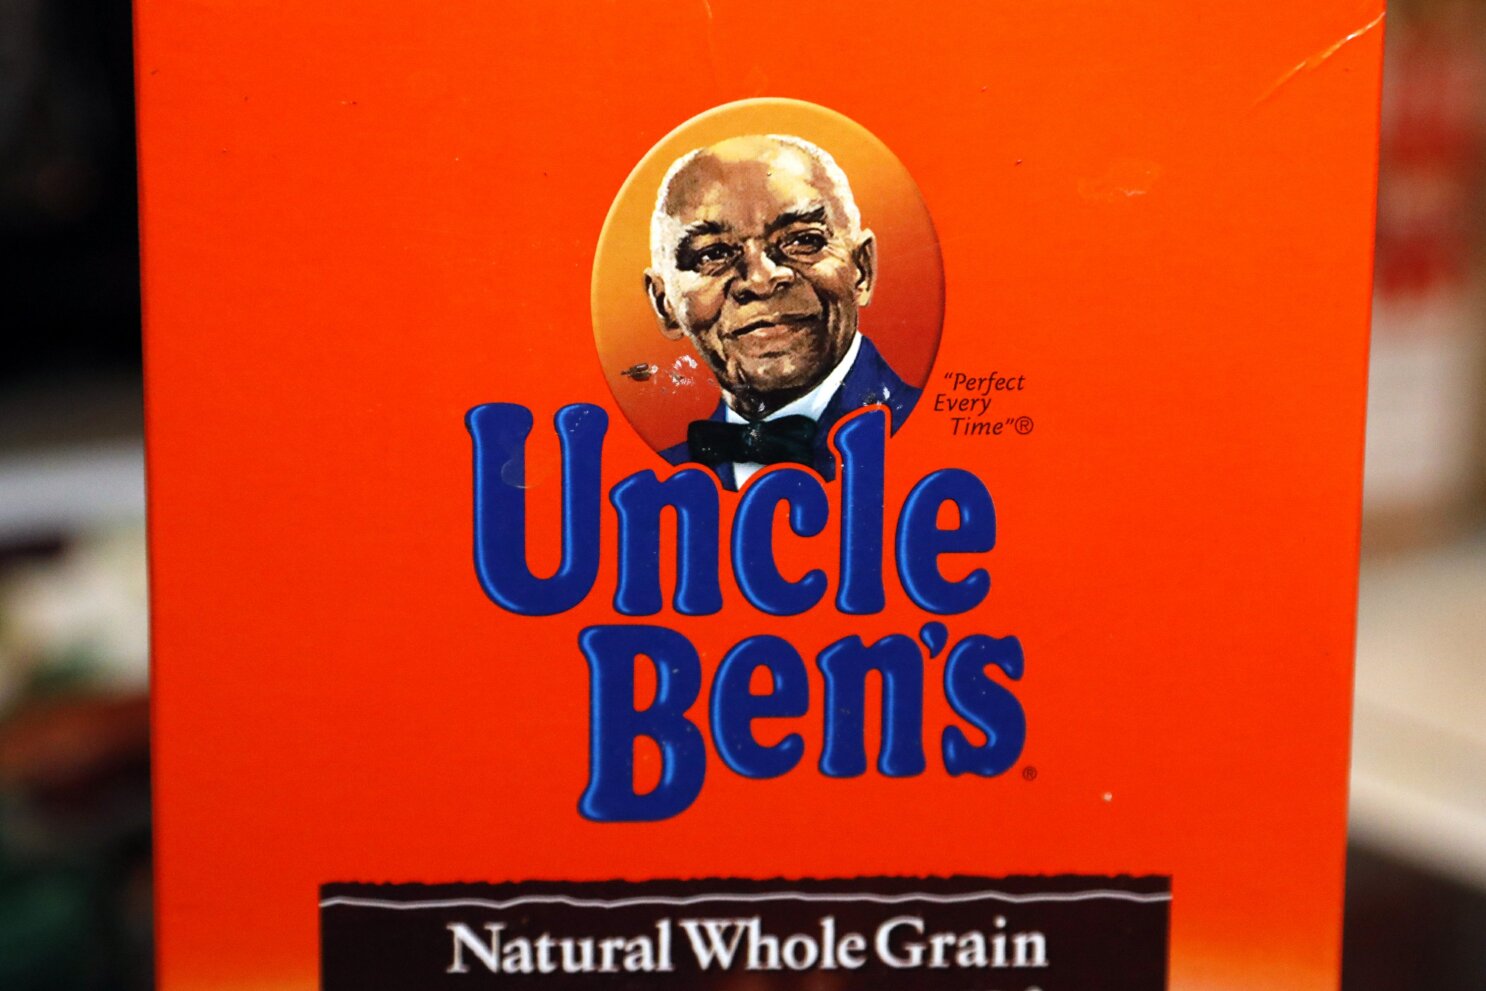 Uncle Ben's Changes Brand Rooted in Racist Imagery. Now It's Ben's